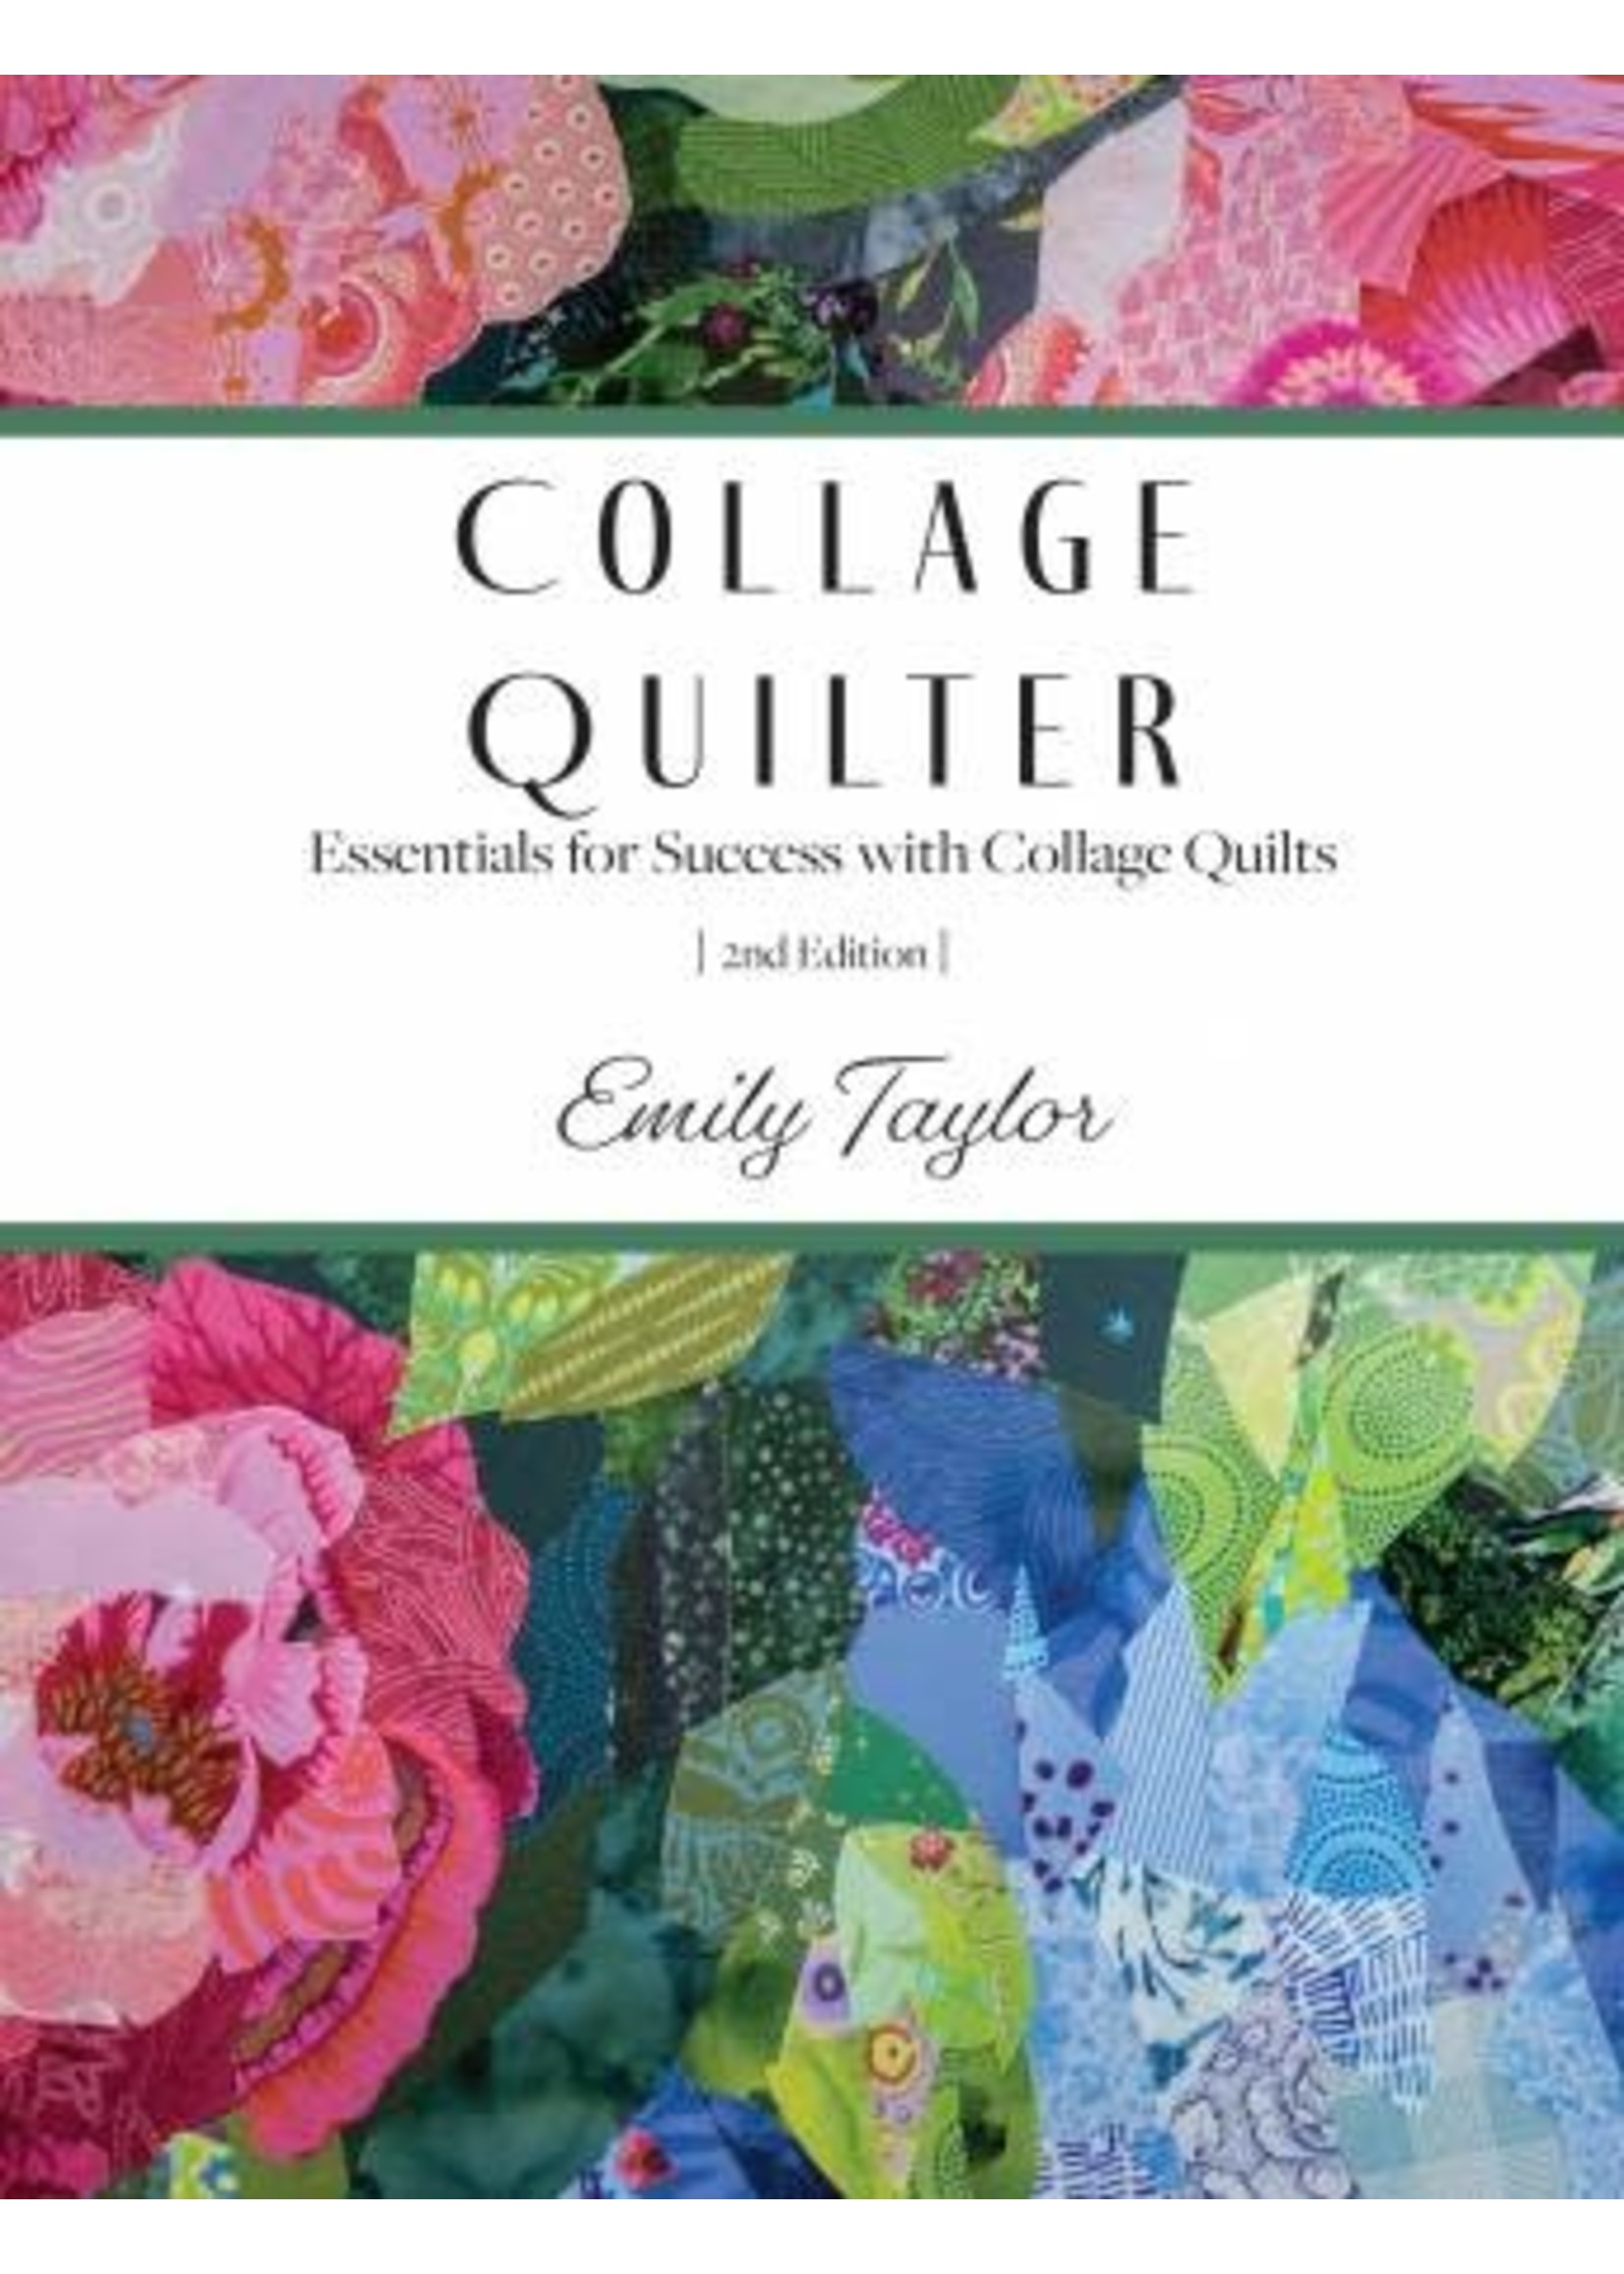 Collage Quilter - Emily Taylor